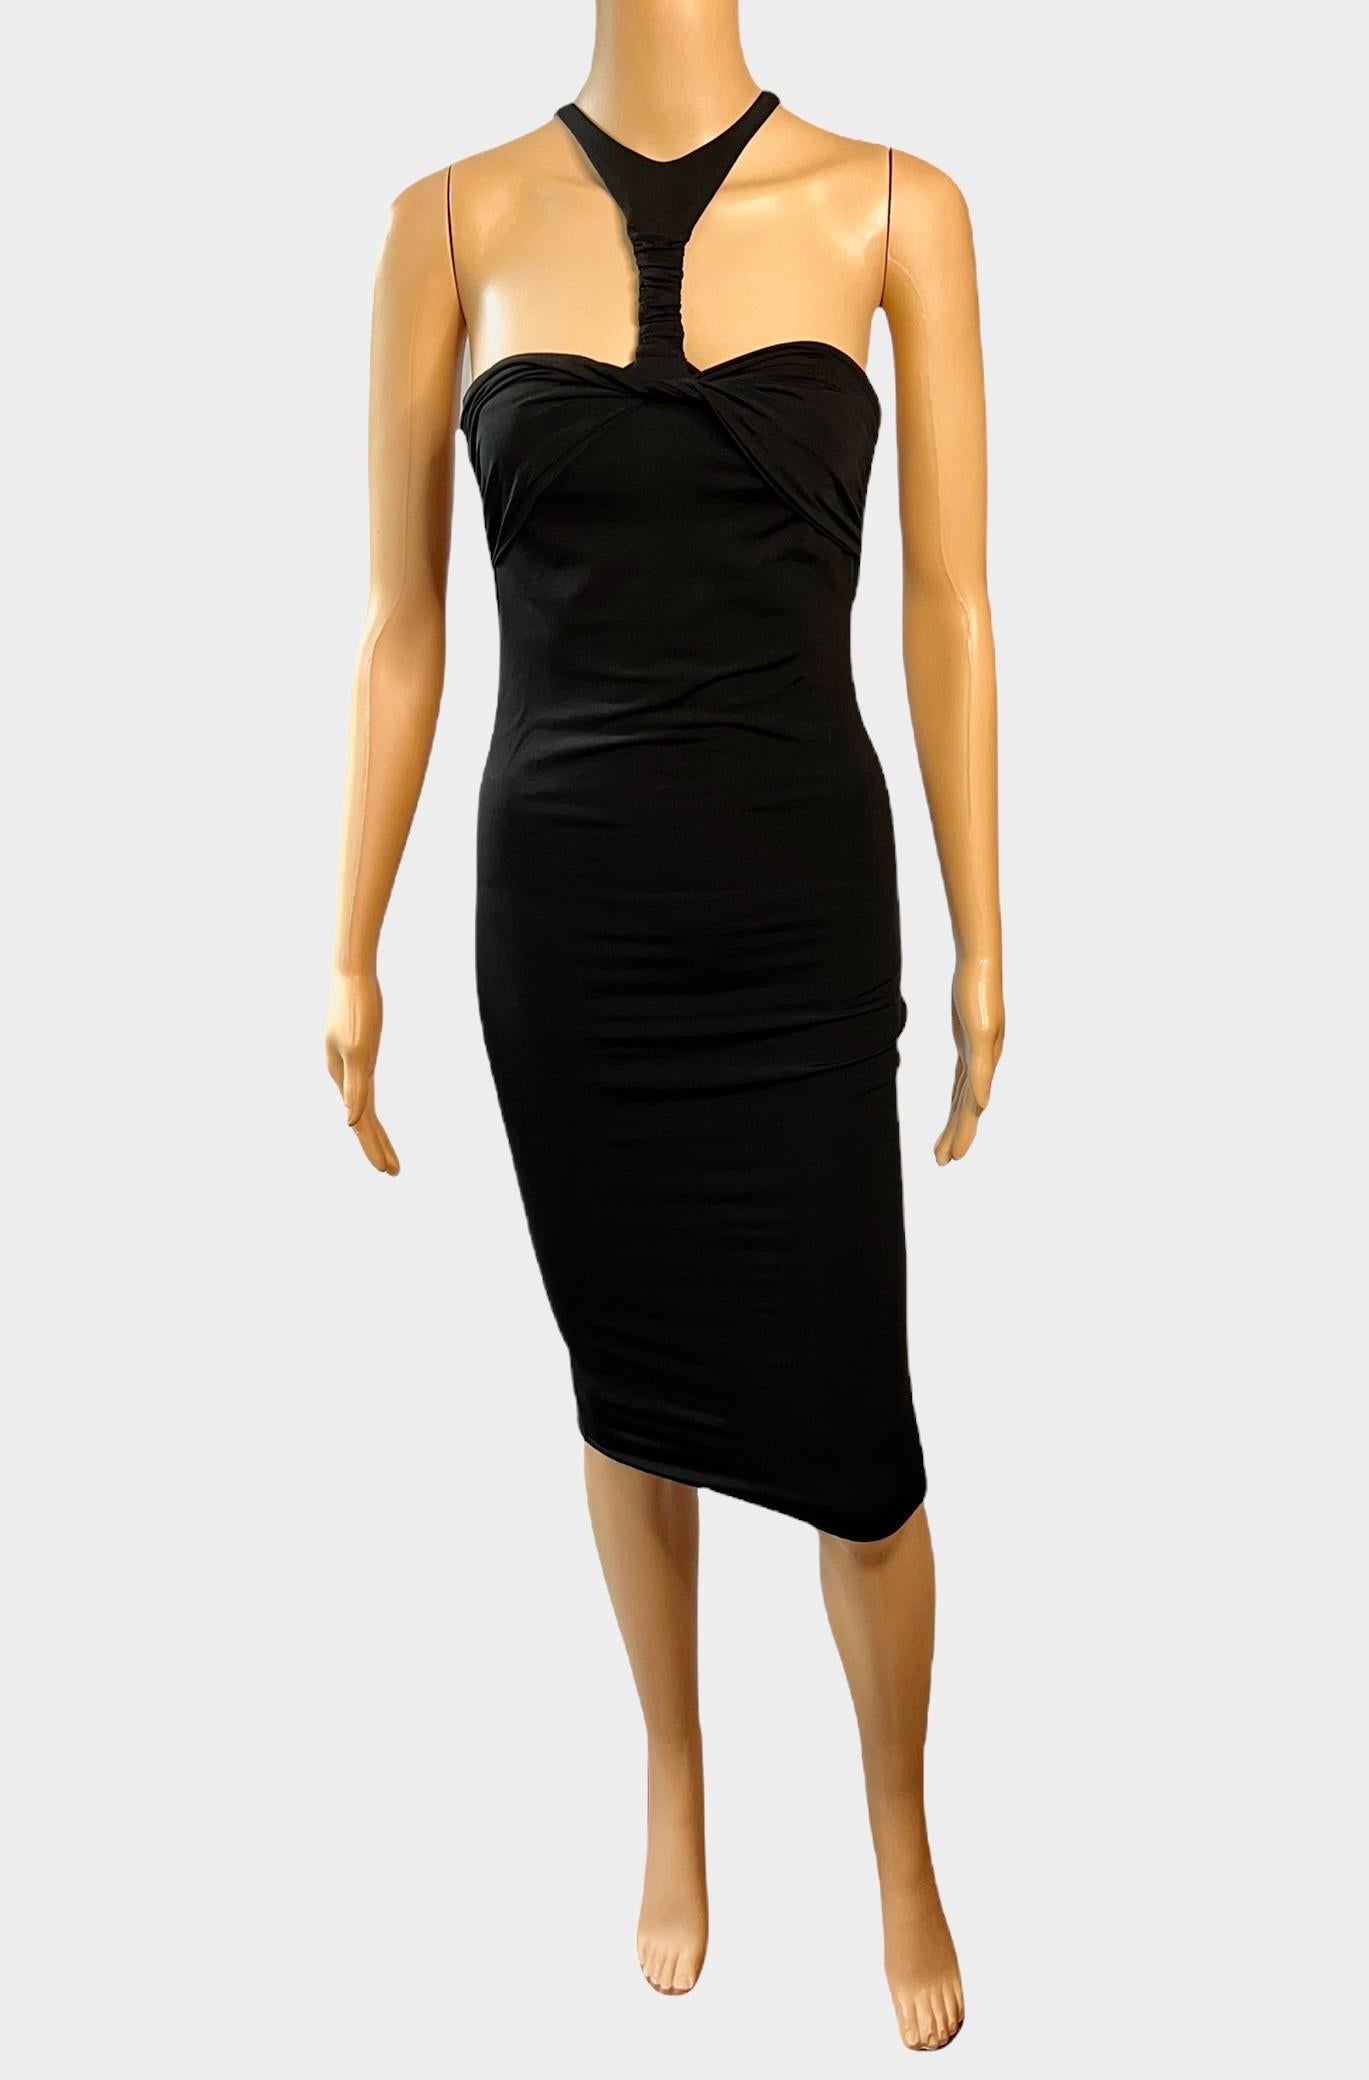 Tom Ford for Gucci F/W 2004 Plunging Cutout Black Evening Dress  In Good Condition For Sale In Naples, FL